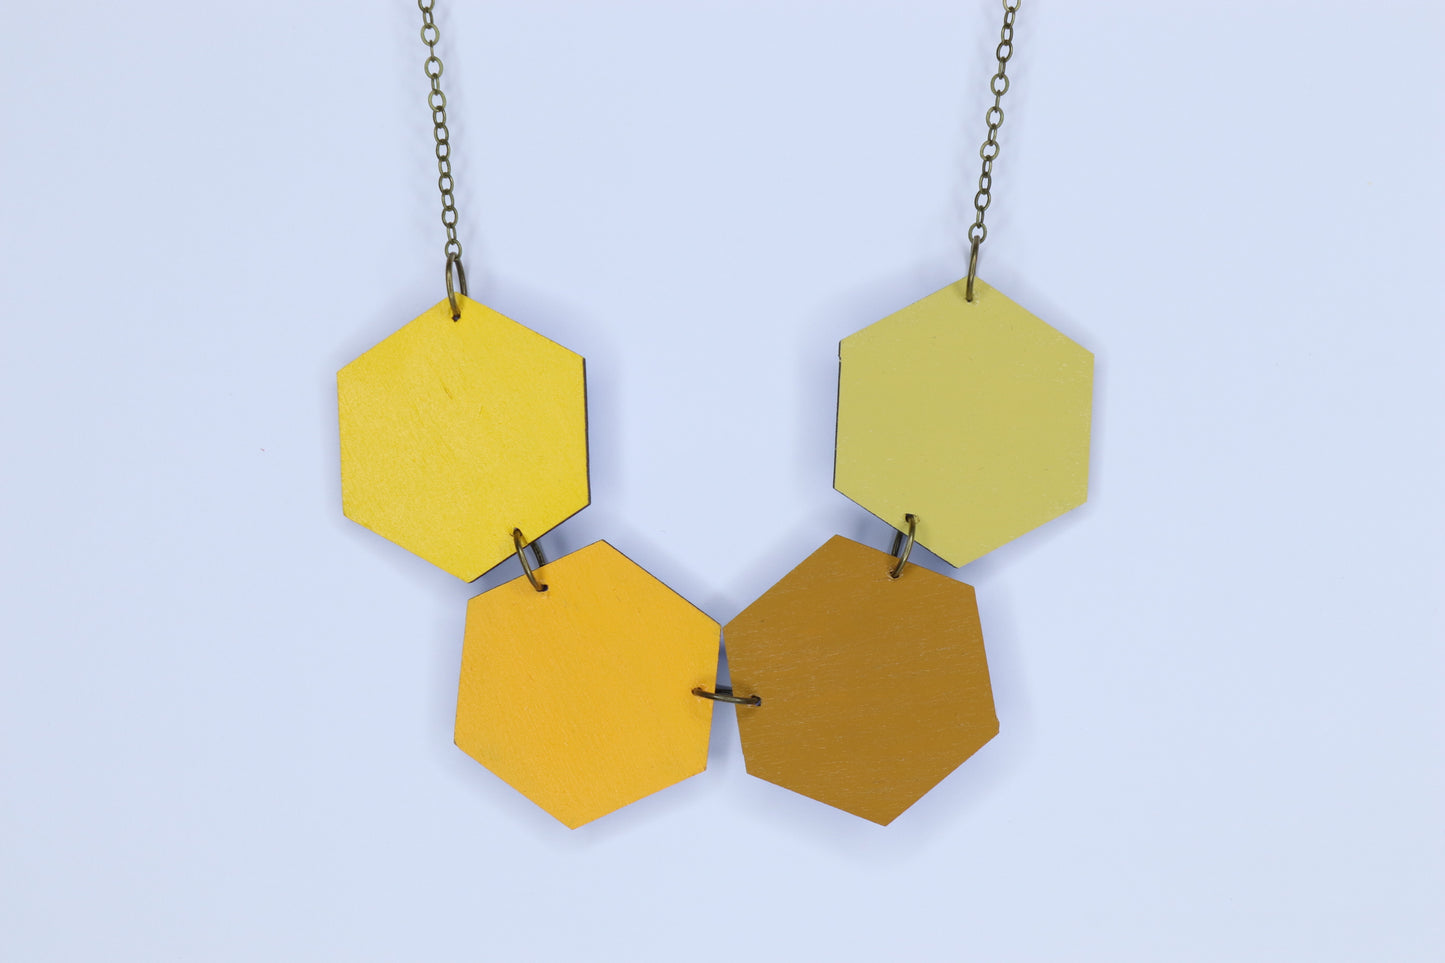 SHADES OF YELLOW REVERSIBLE NECKLACE